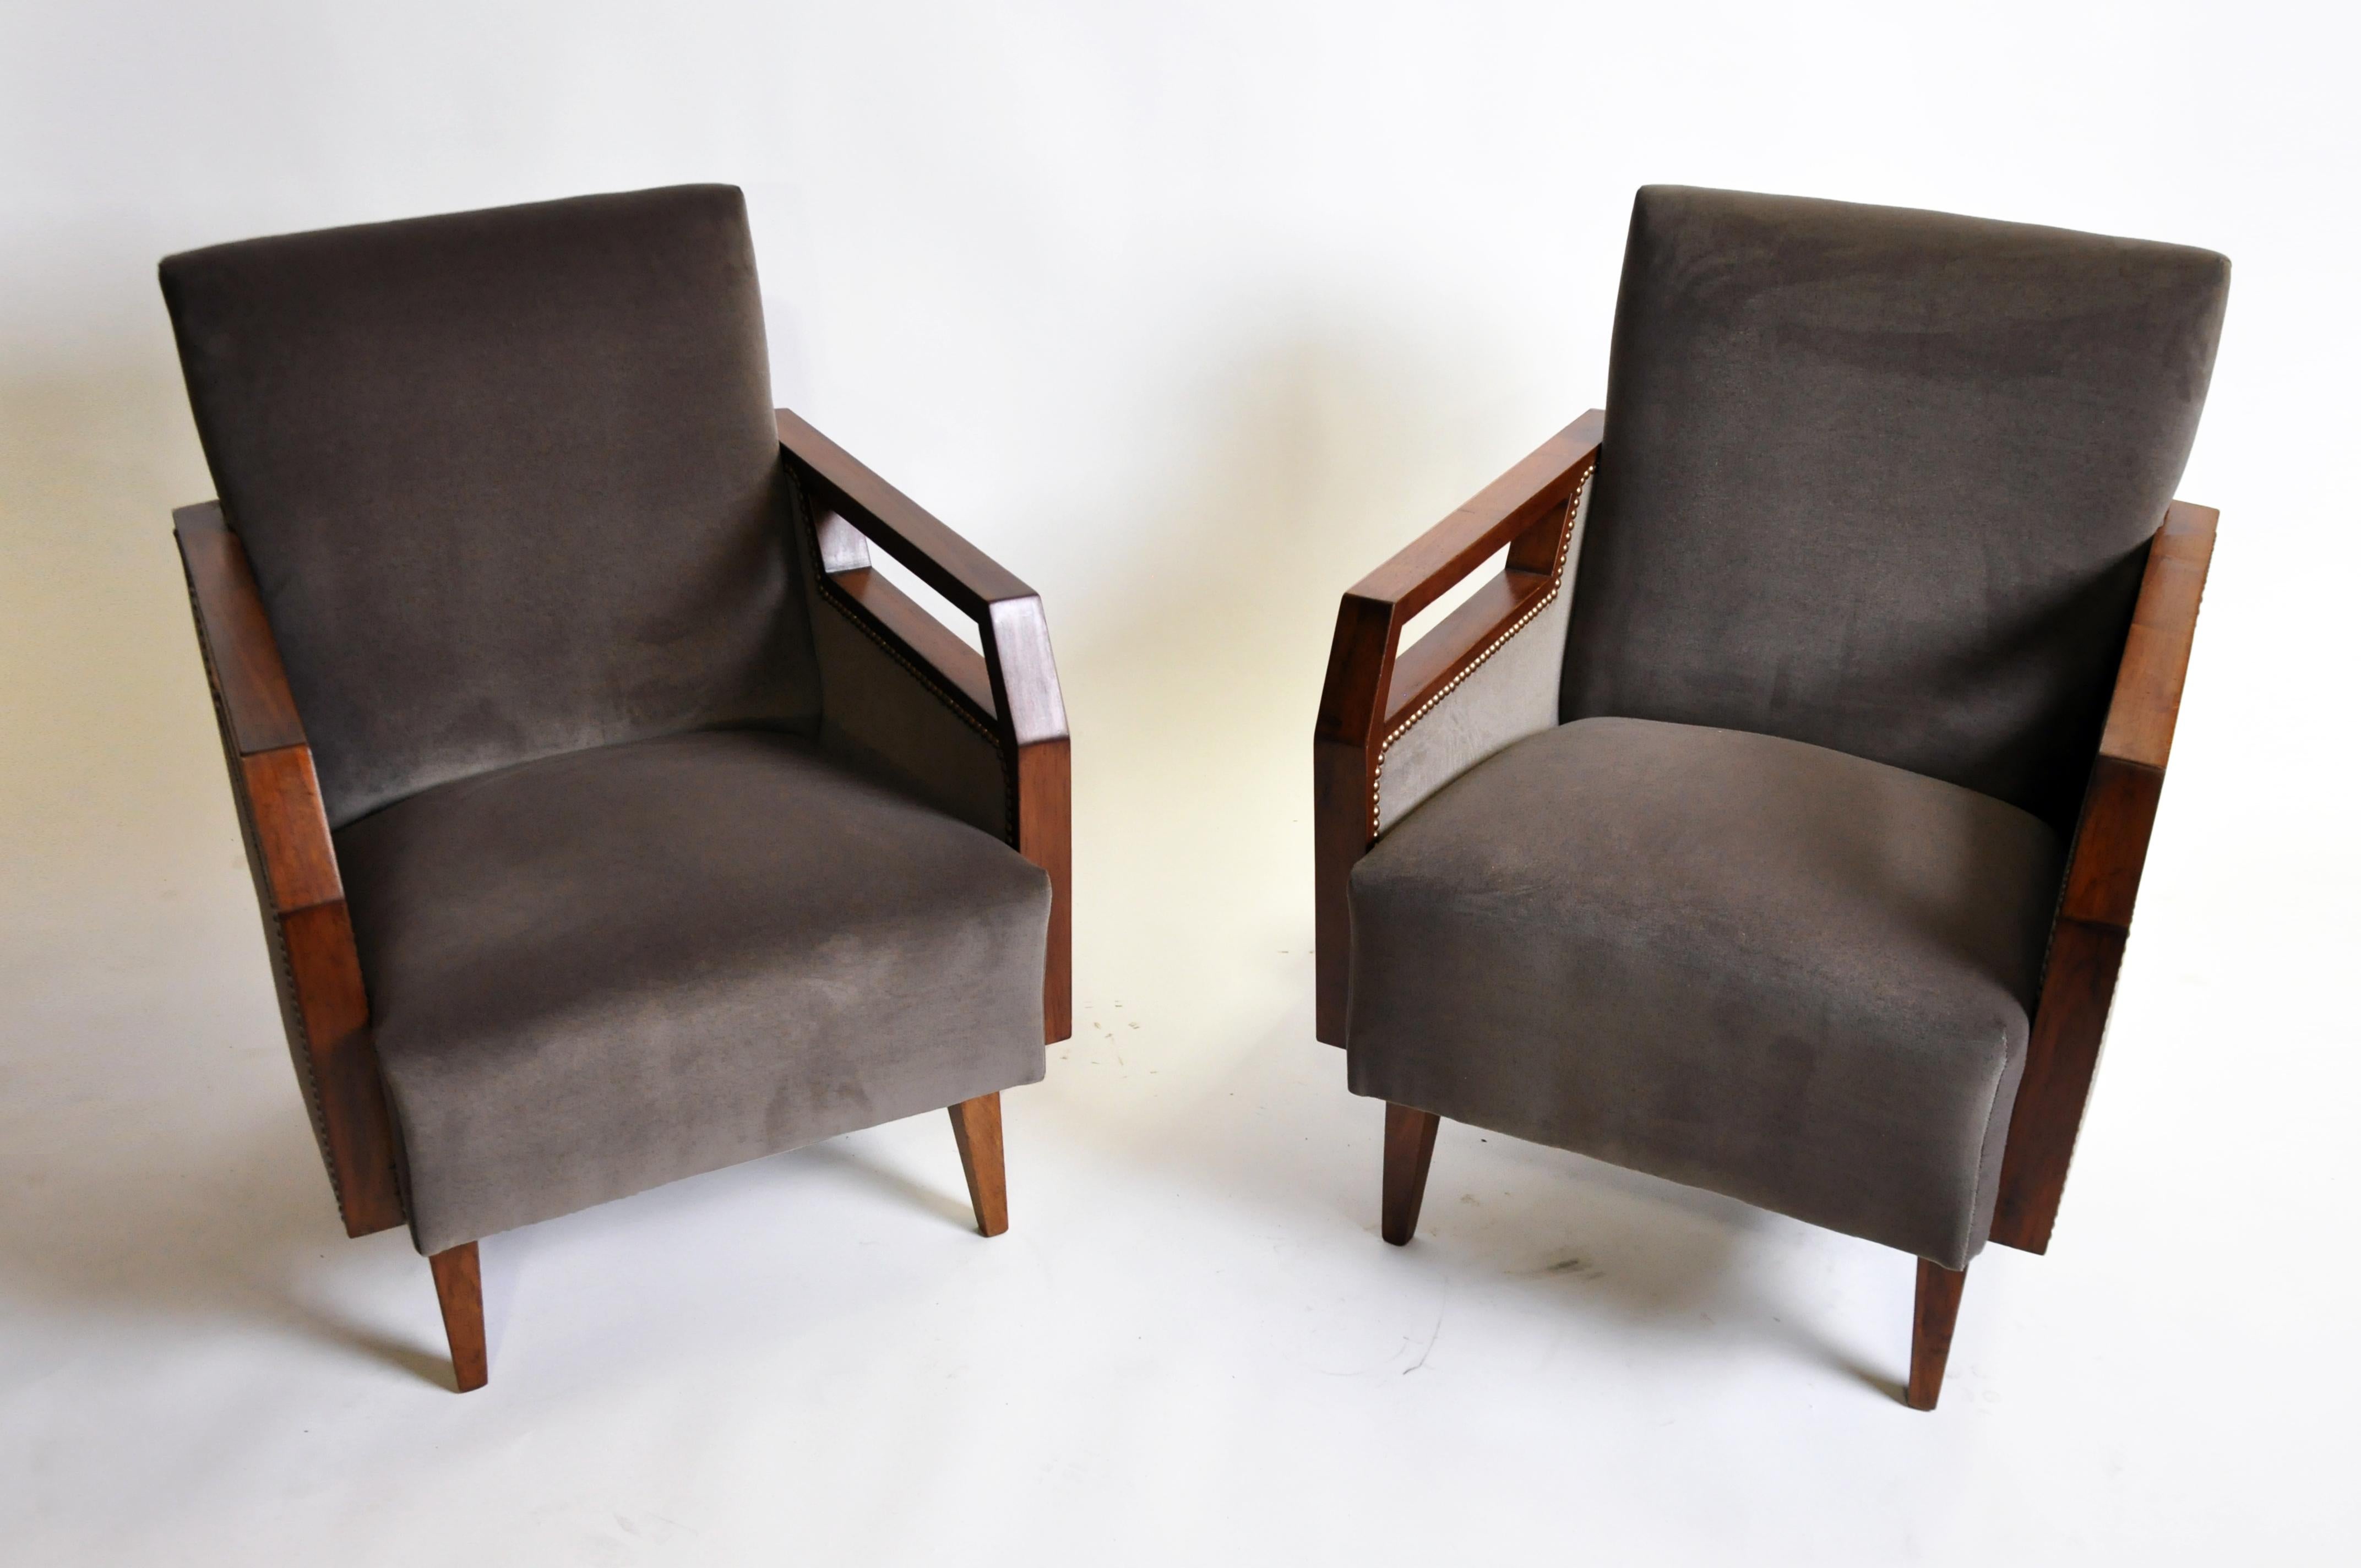 French Pair of Mid-Century Modern Chairs